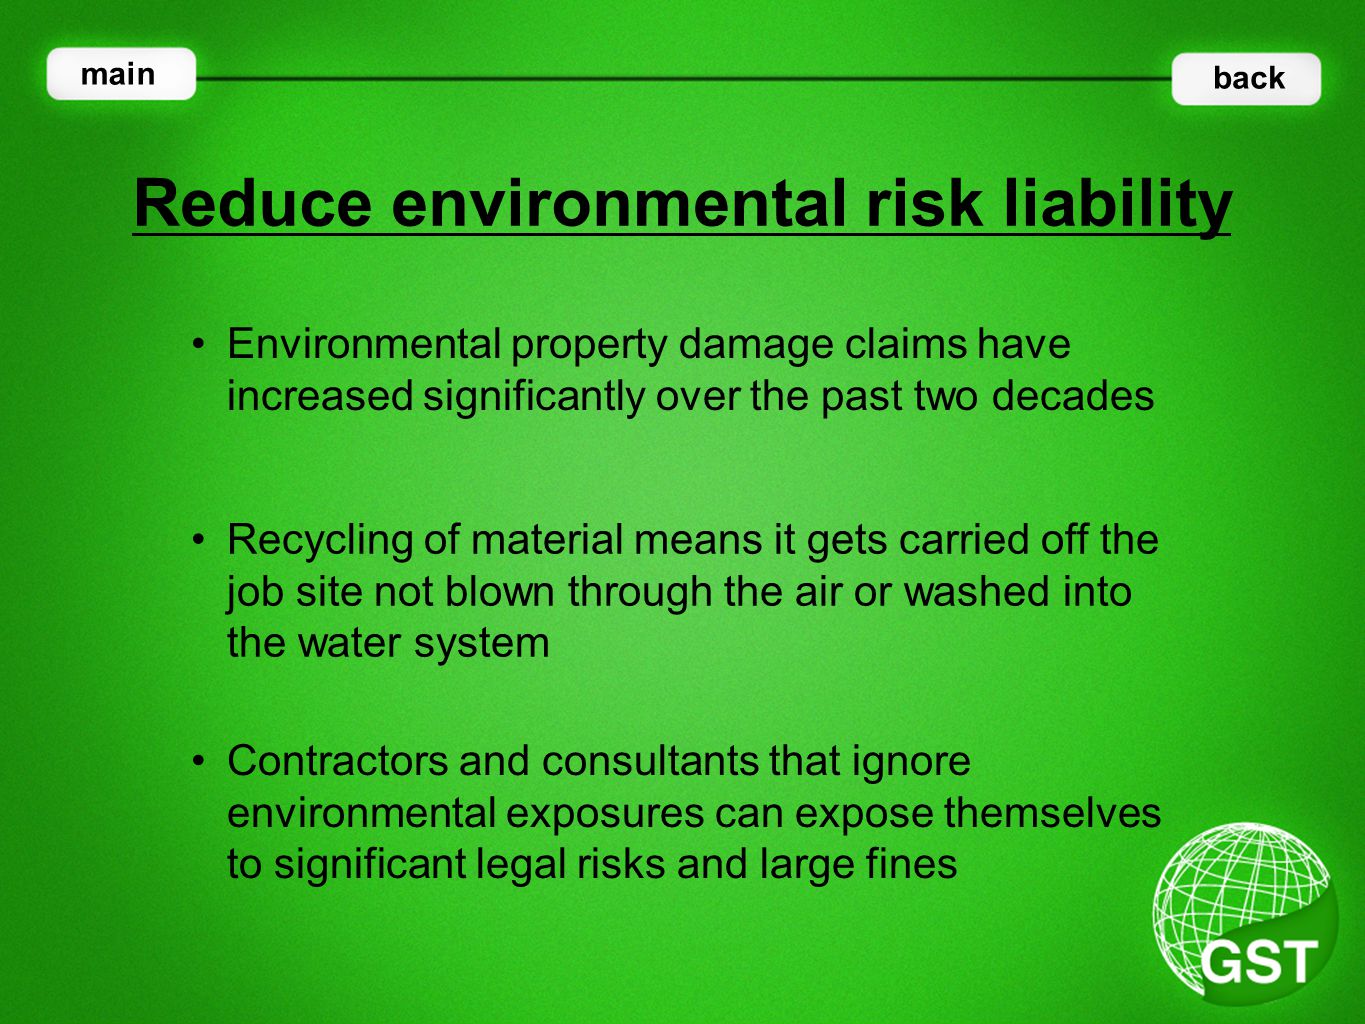 Environmental property damage claims have increased significantly over the past two decades Reduce environmental risk liability main back Recycling of material means it gets carried off the job site not blown through the air or washed into the water system Contractors and consultants that ignore environmental exposures can expose themselves to significant legal risks and large fines